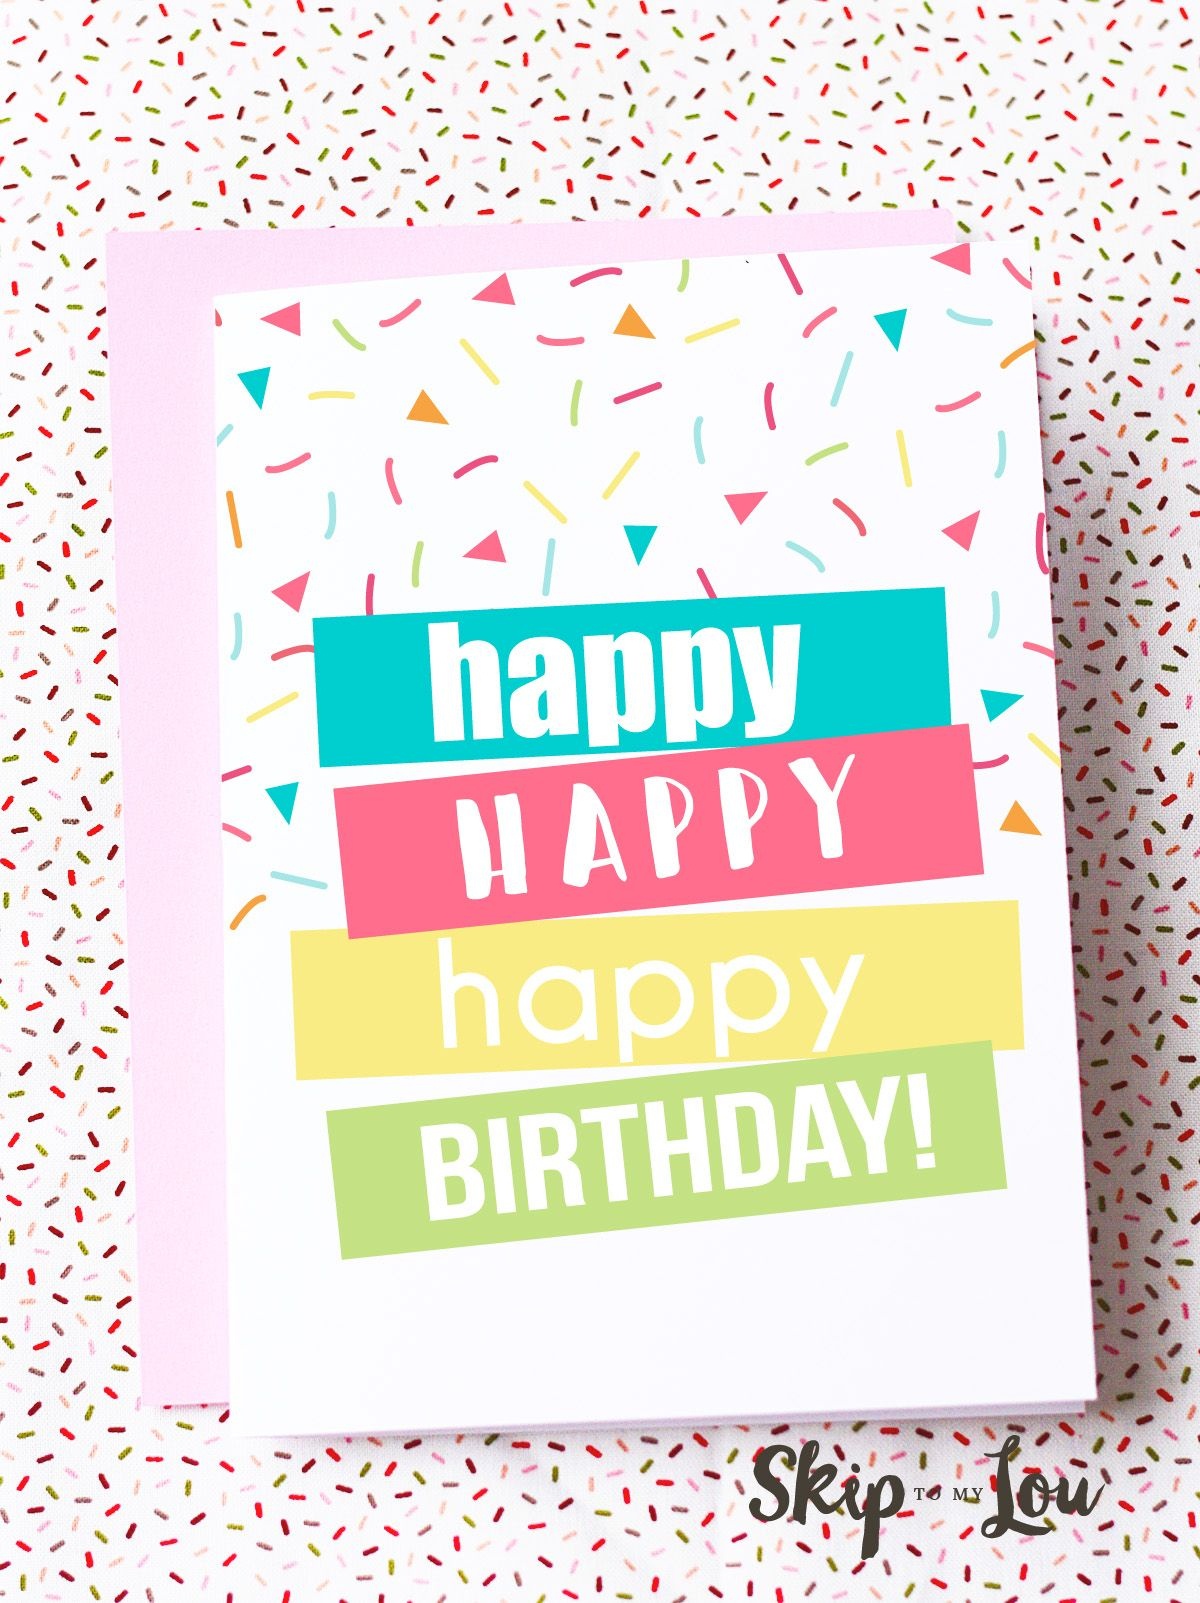 free-funny-printable-birthday-cards-for-adults-eight-designs